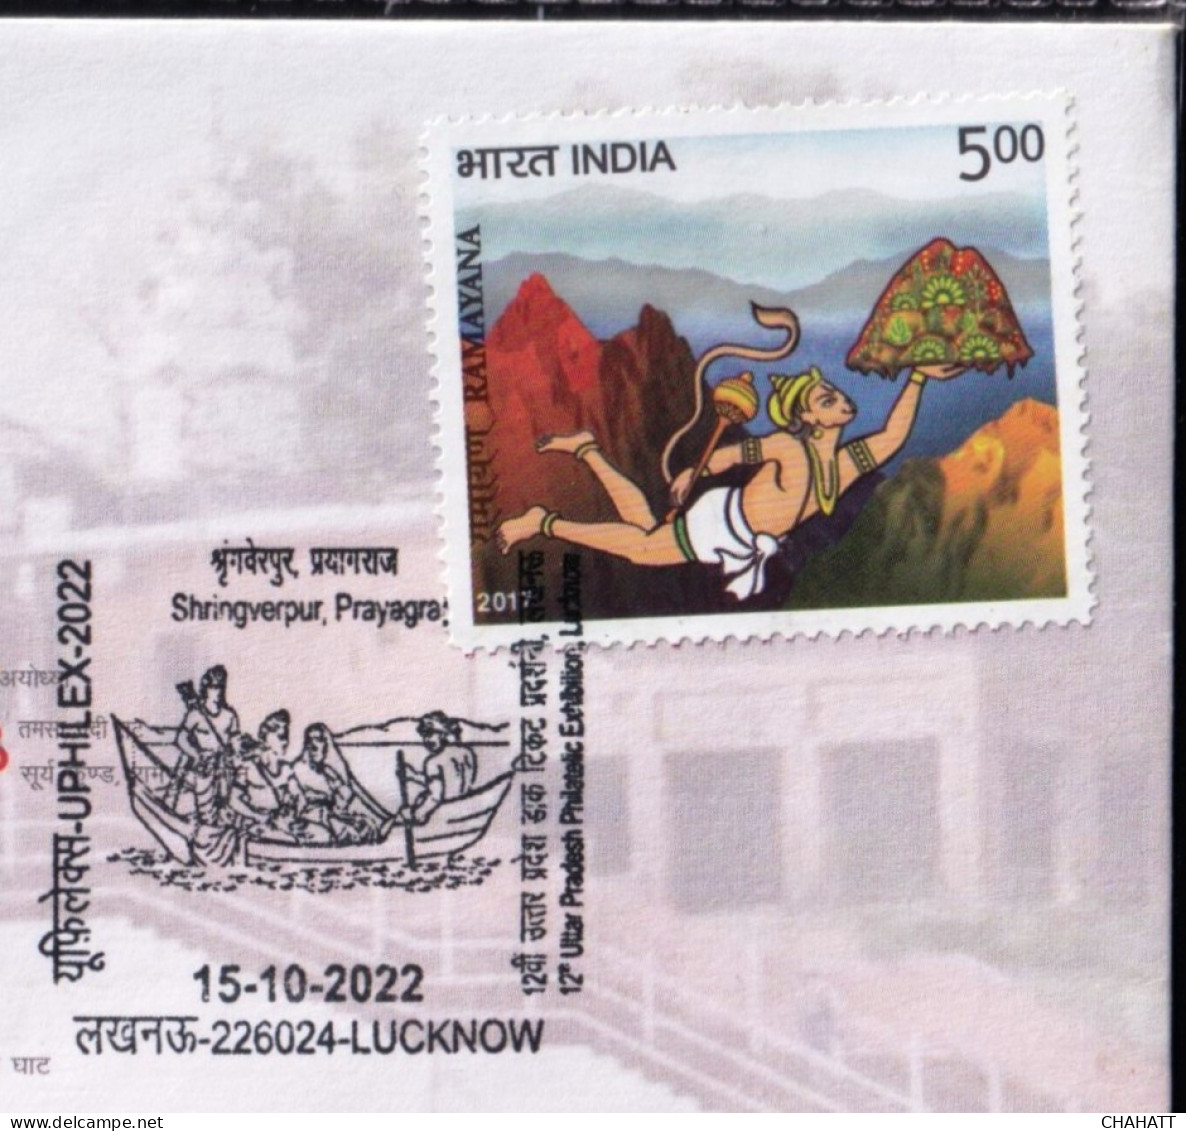 HINDUISM - RAMAYAN- SRINGESWAR- RIVER CROSSING BY BOAT - PICTORIAL CANCELLATION - SPECIAL COVER - INDIA -2022- BX4-23 - Hinduismo